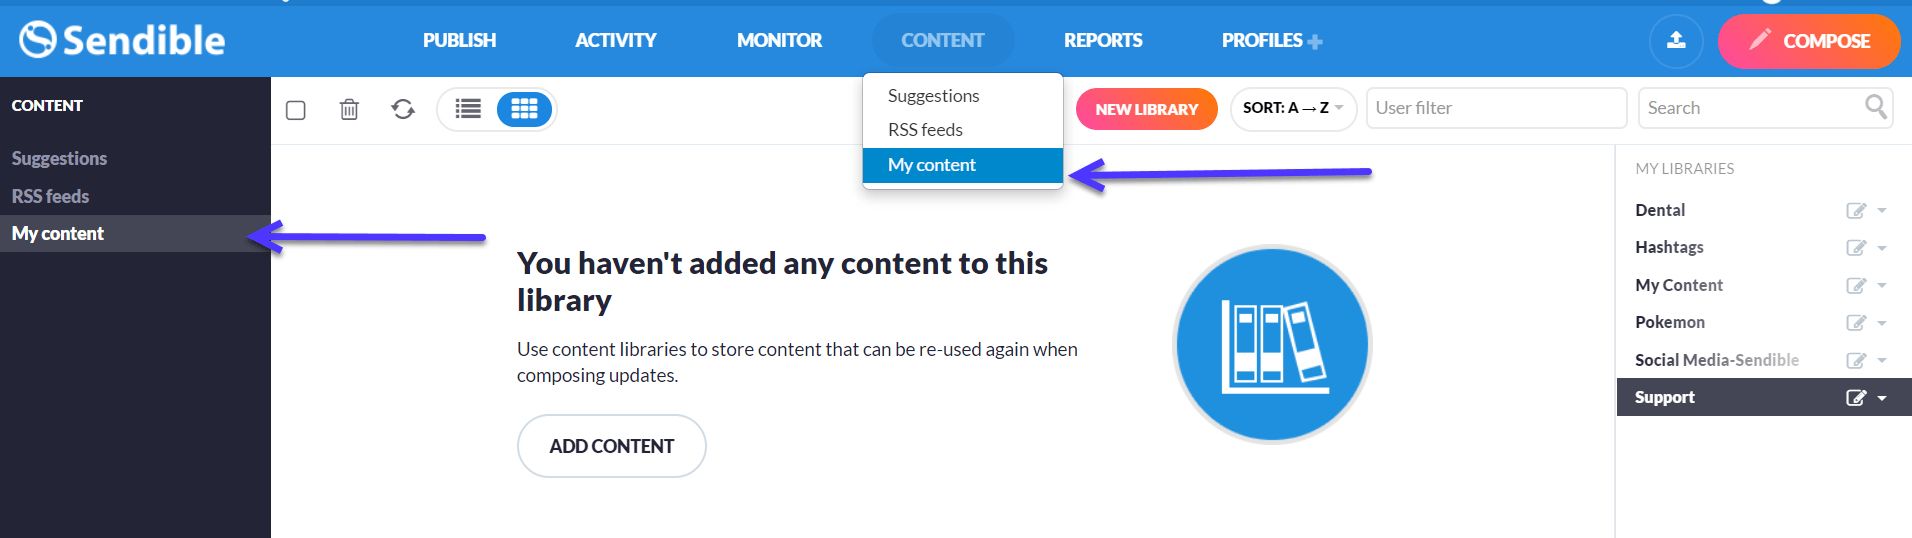 Create_a_Content_Library_my_content__1_.png